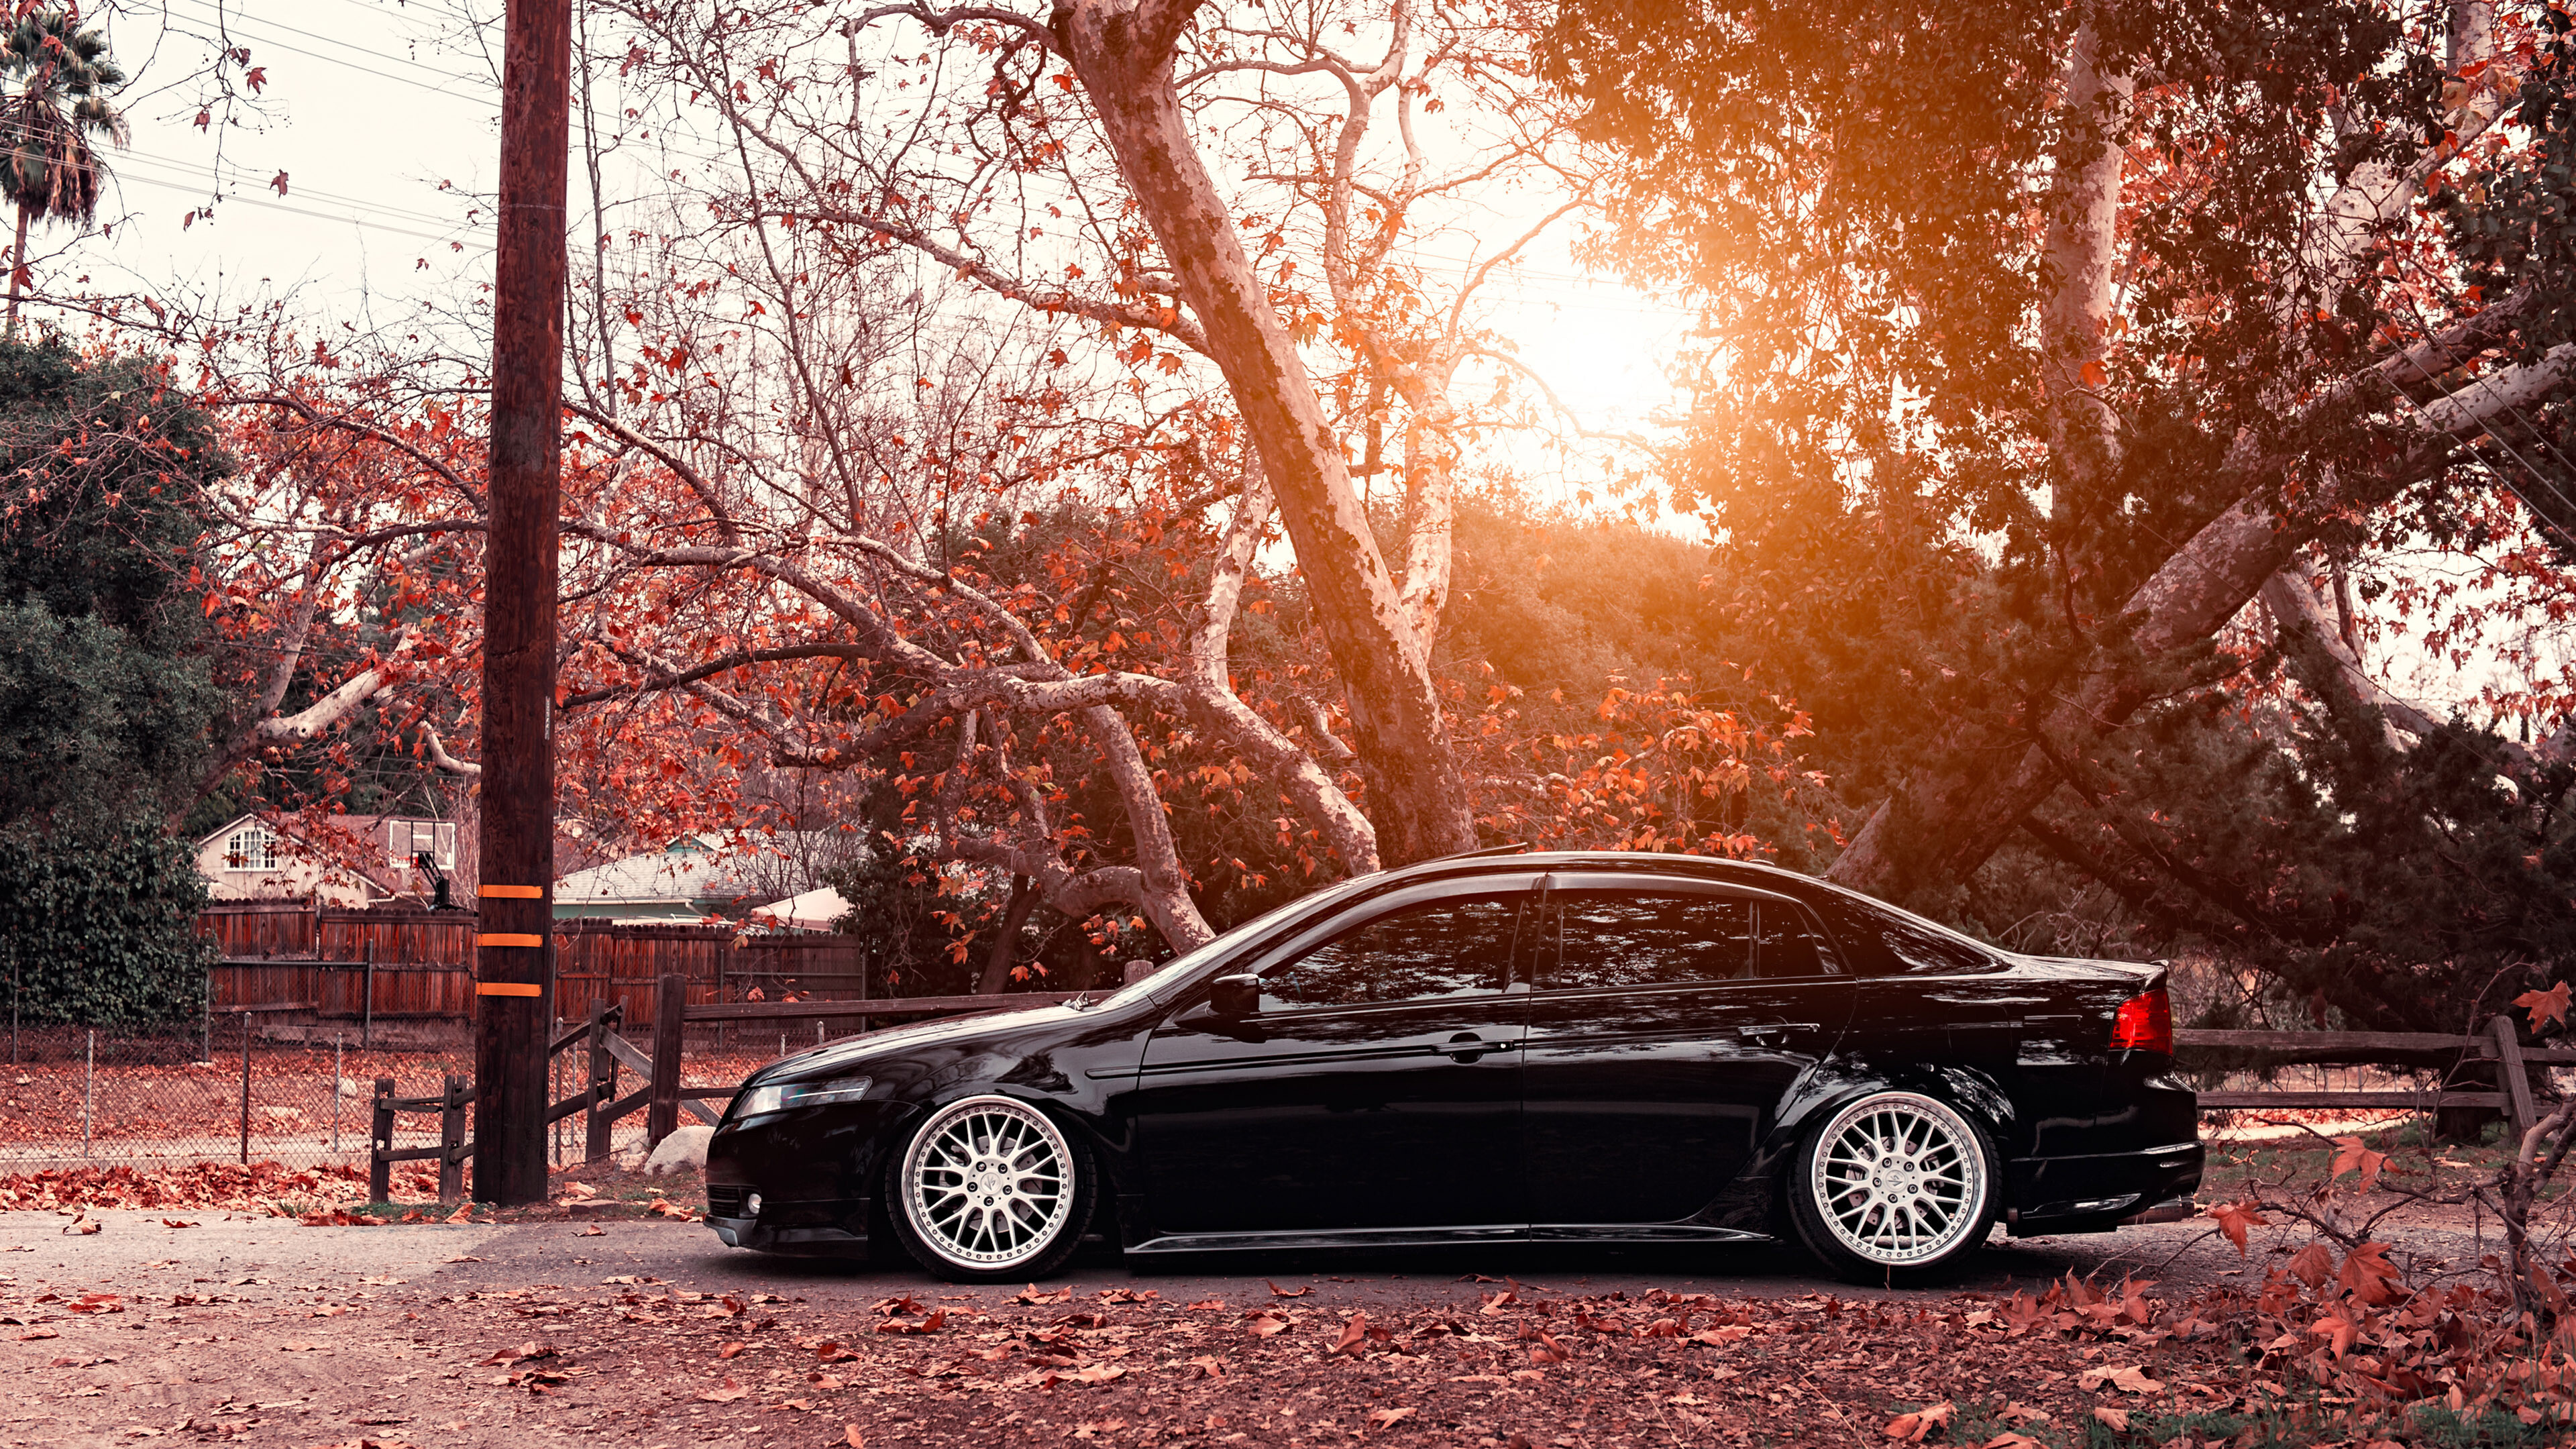 Acura: Launched in 1986 by its parent company, Honda, TSX. 3840x2160 4K Wallpaper.